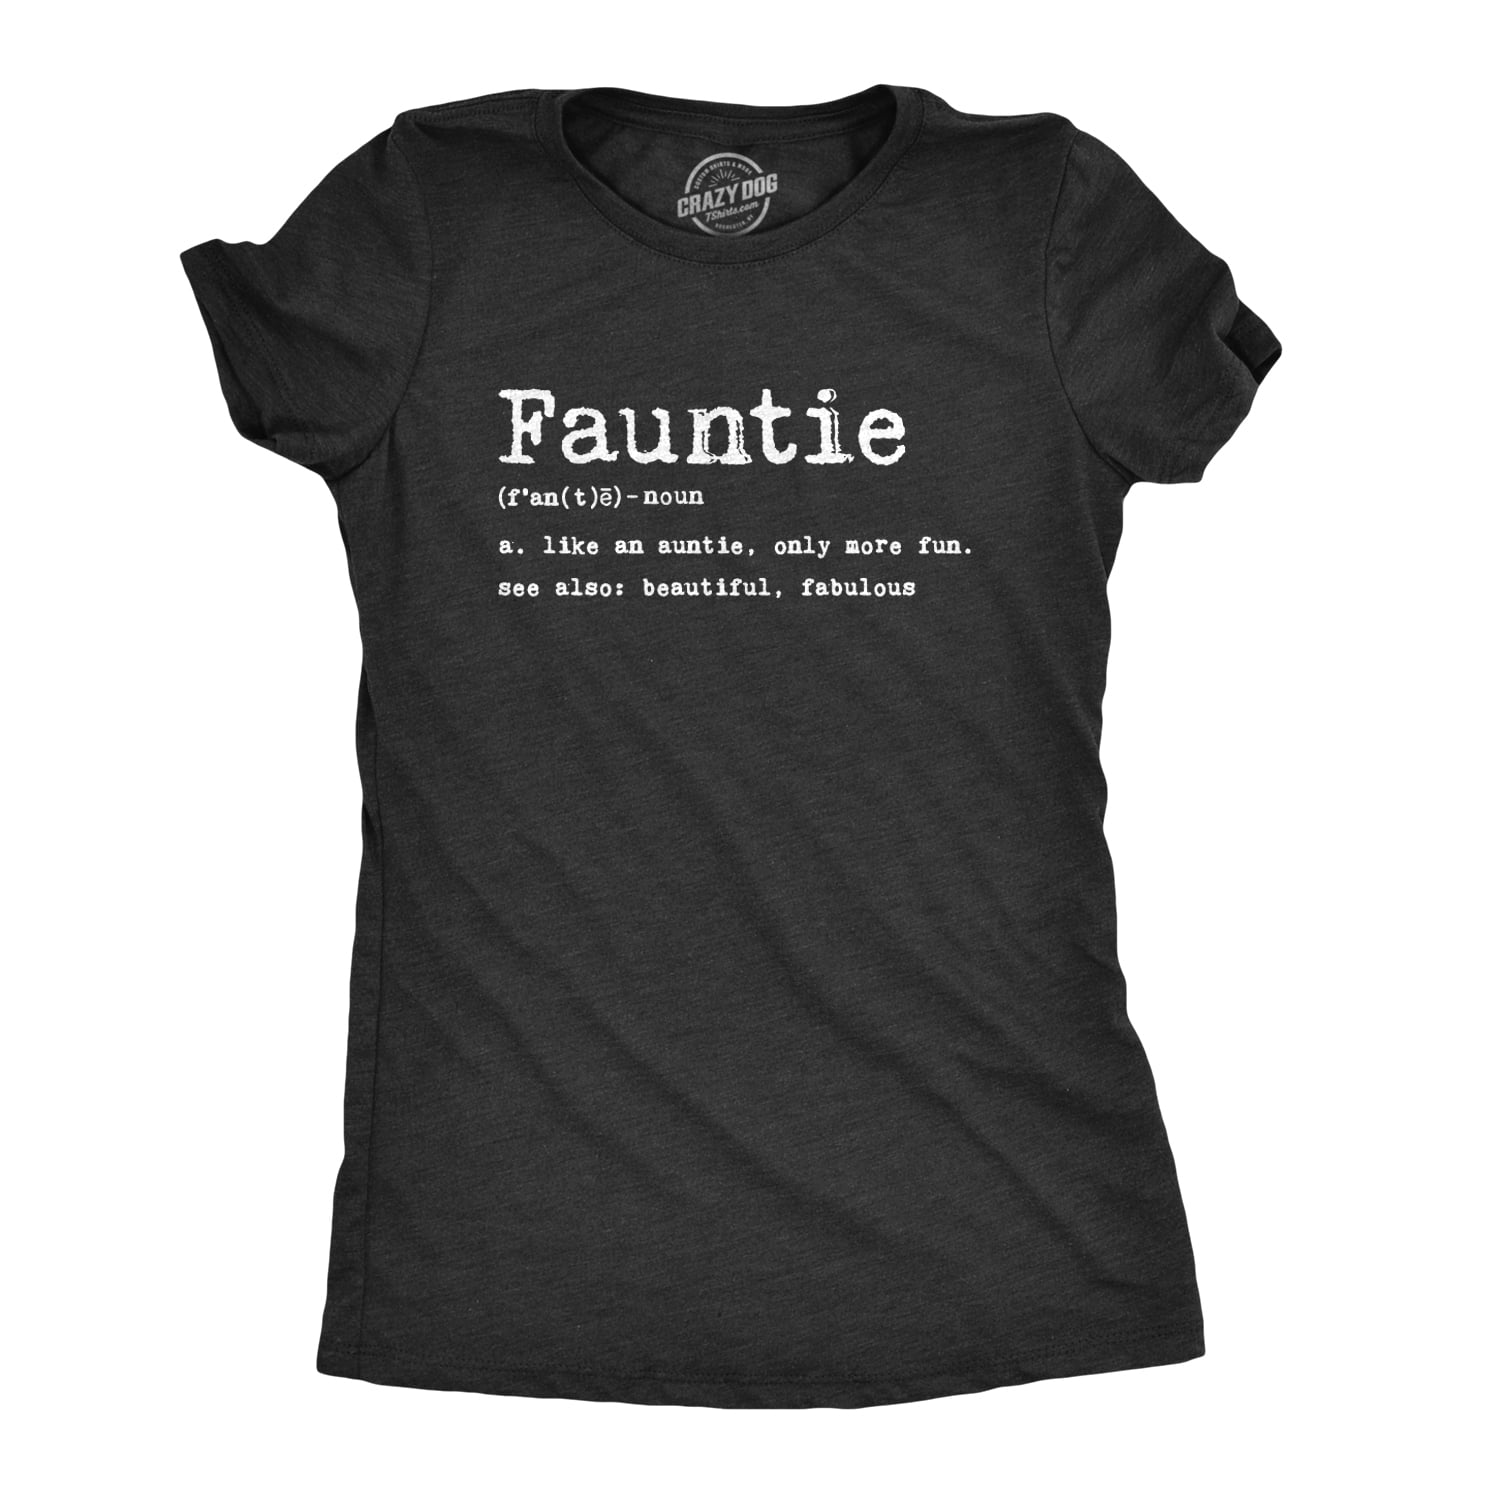 Cool Aunt Shirt Cool Auntie Shirt Funny Auntie TShirt Best Auntie Shirt Gift for Aunt from Niece Funny Aunt T Shirt Gift from Nephew